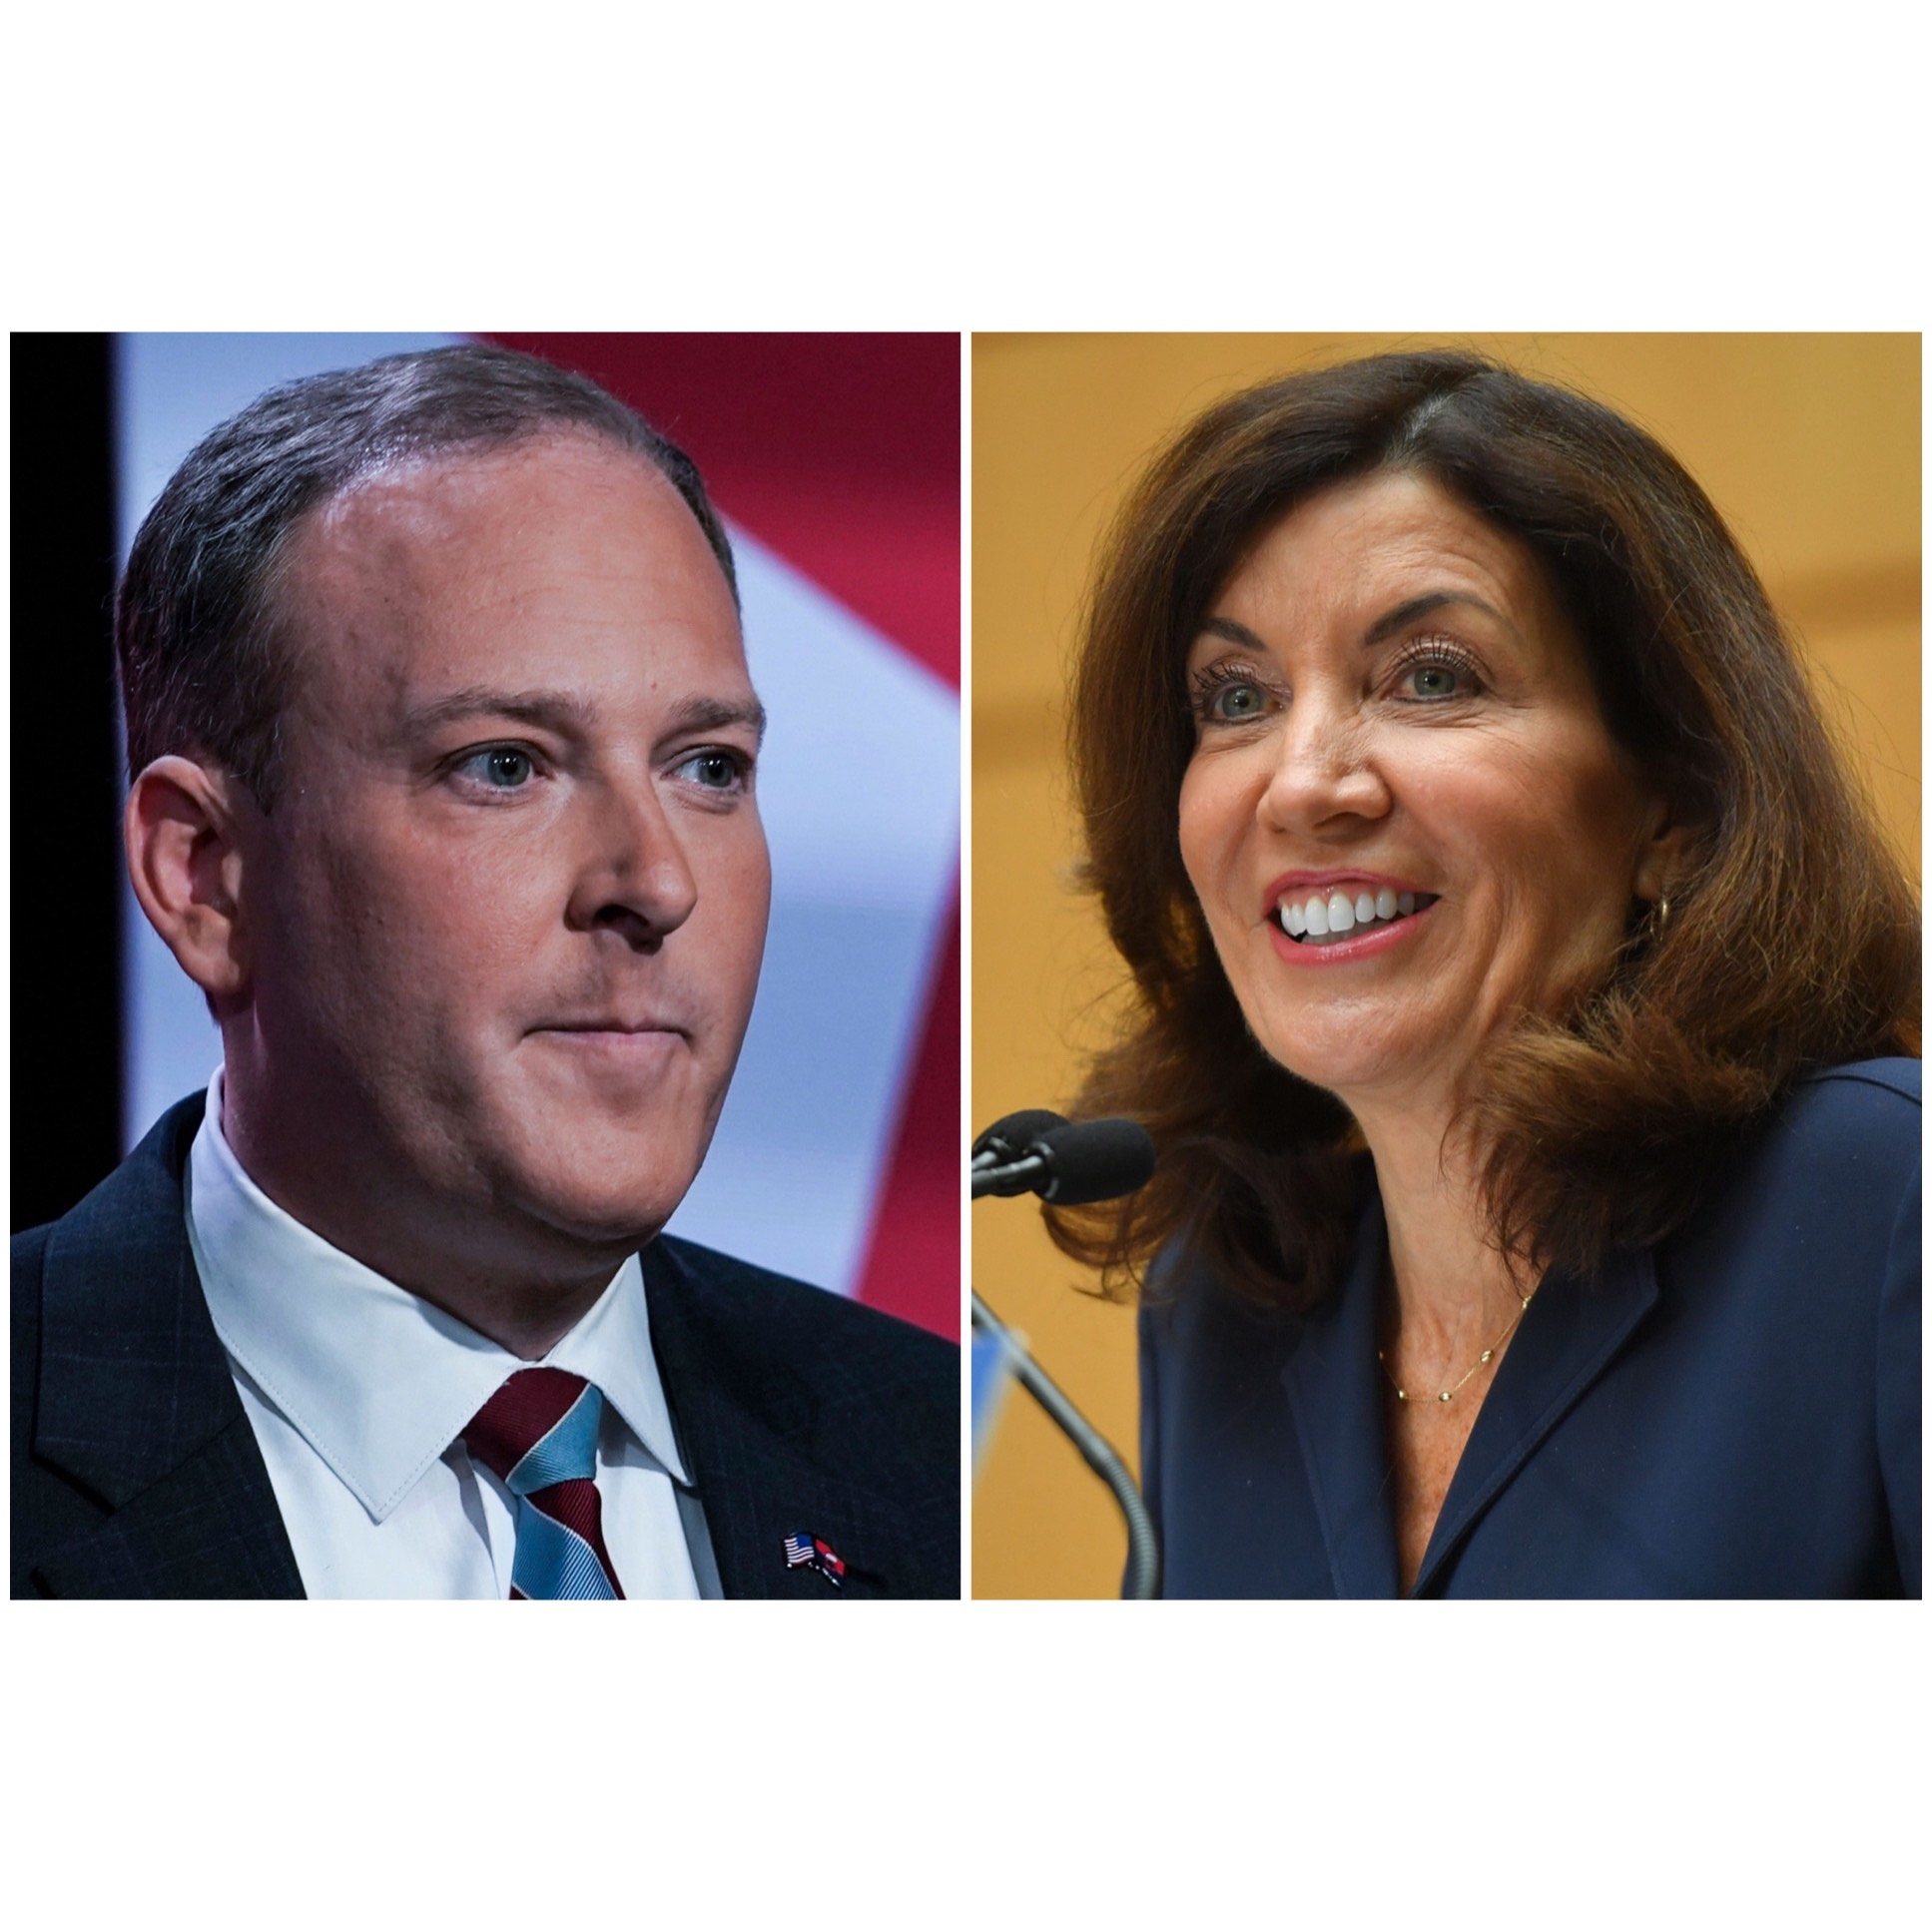 Gov. Kathy Hochul (right) has a big lead over her Republican challenger, Rep. Lee Zeldin (left), in the race for governor, according to two polls out today.